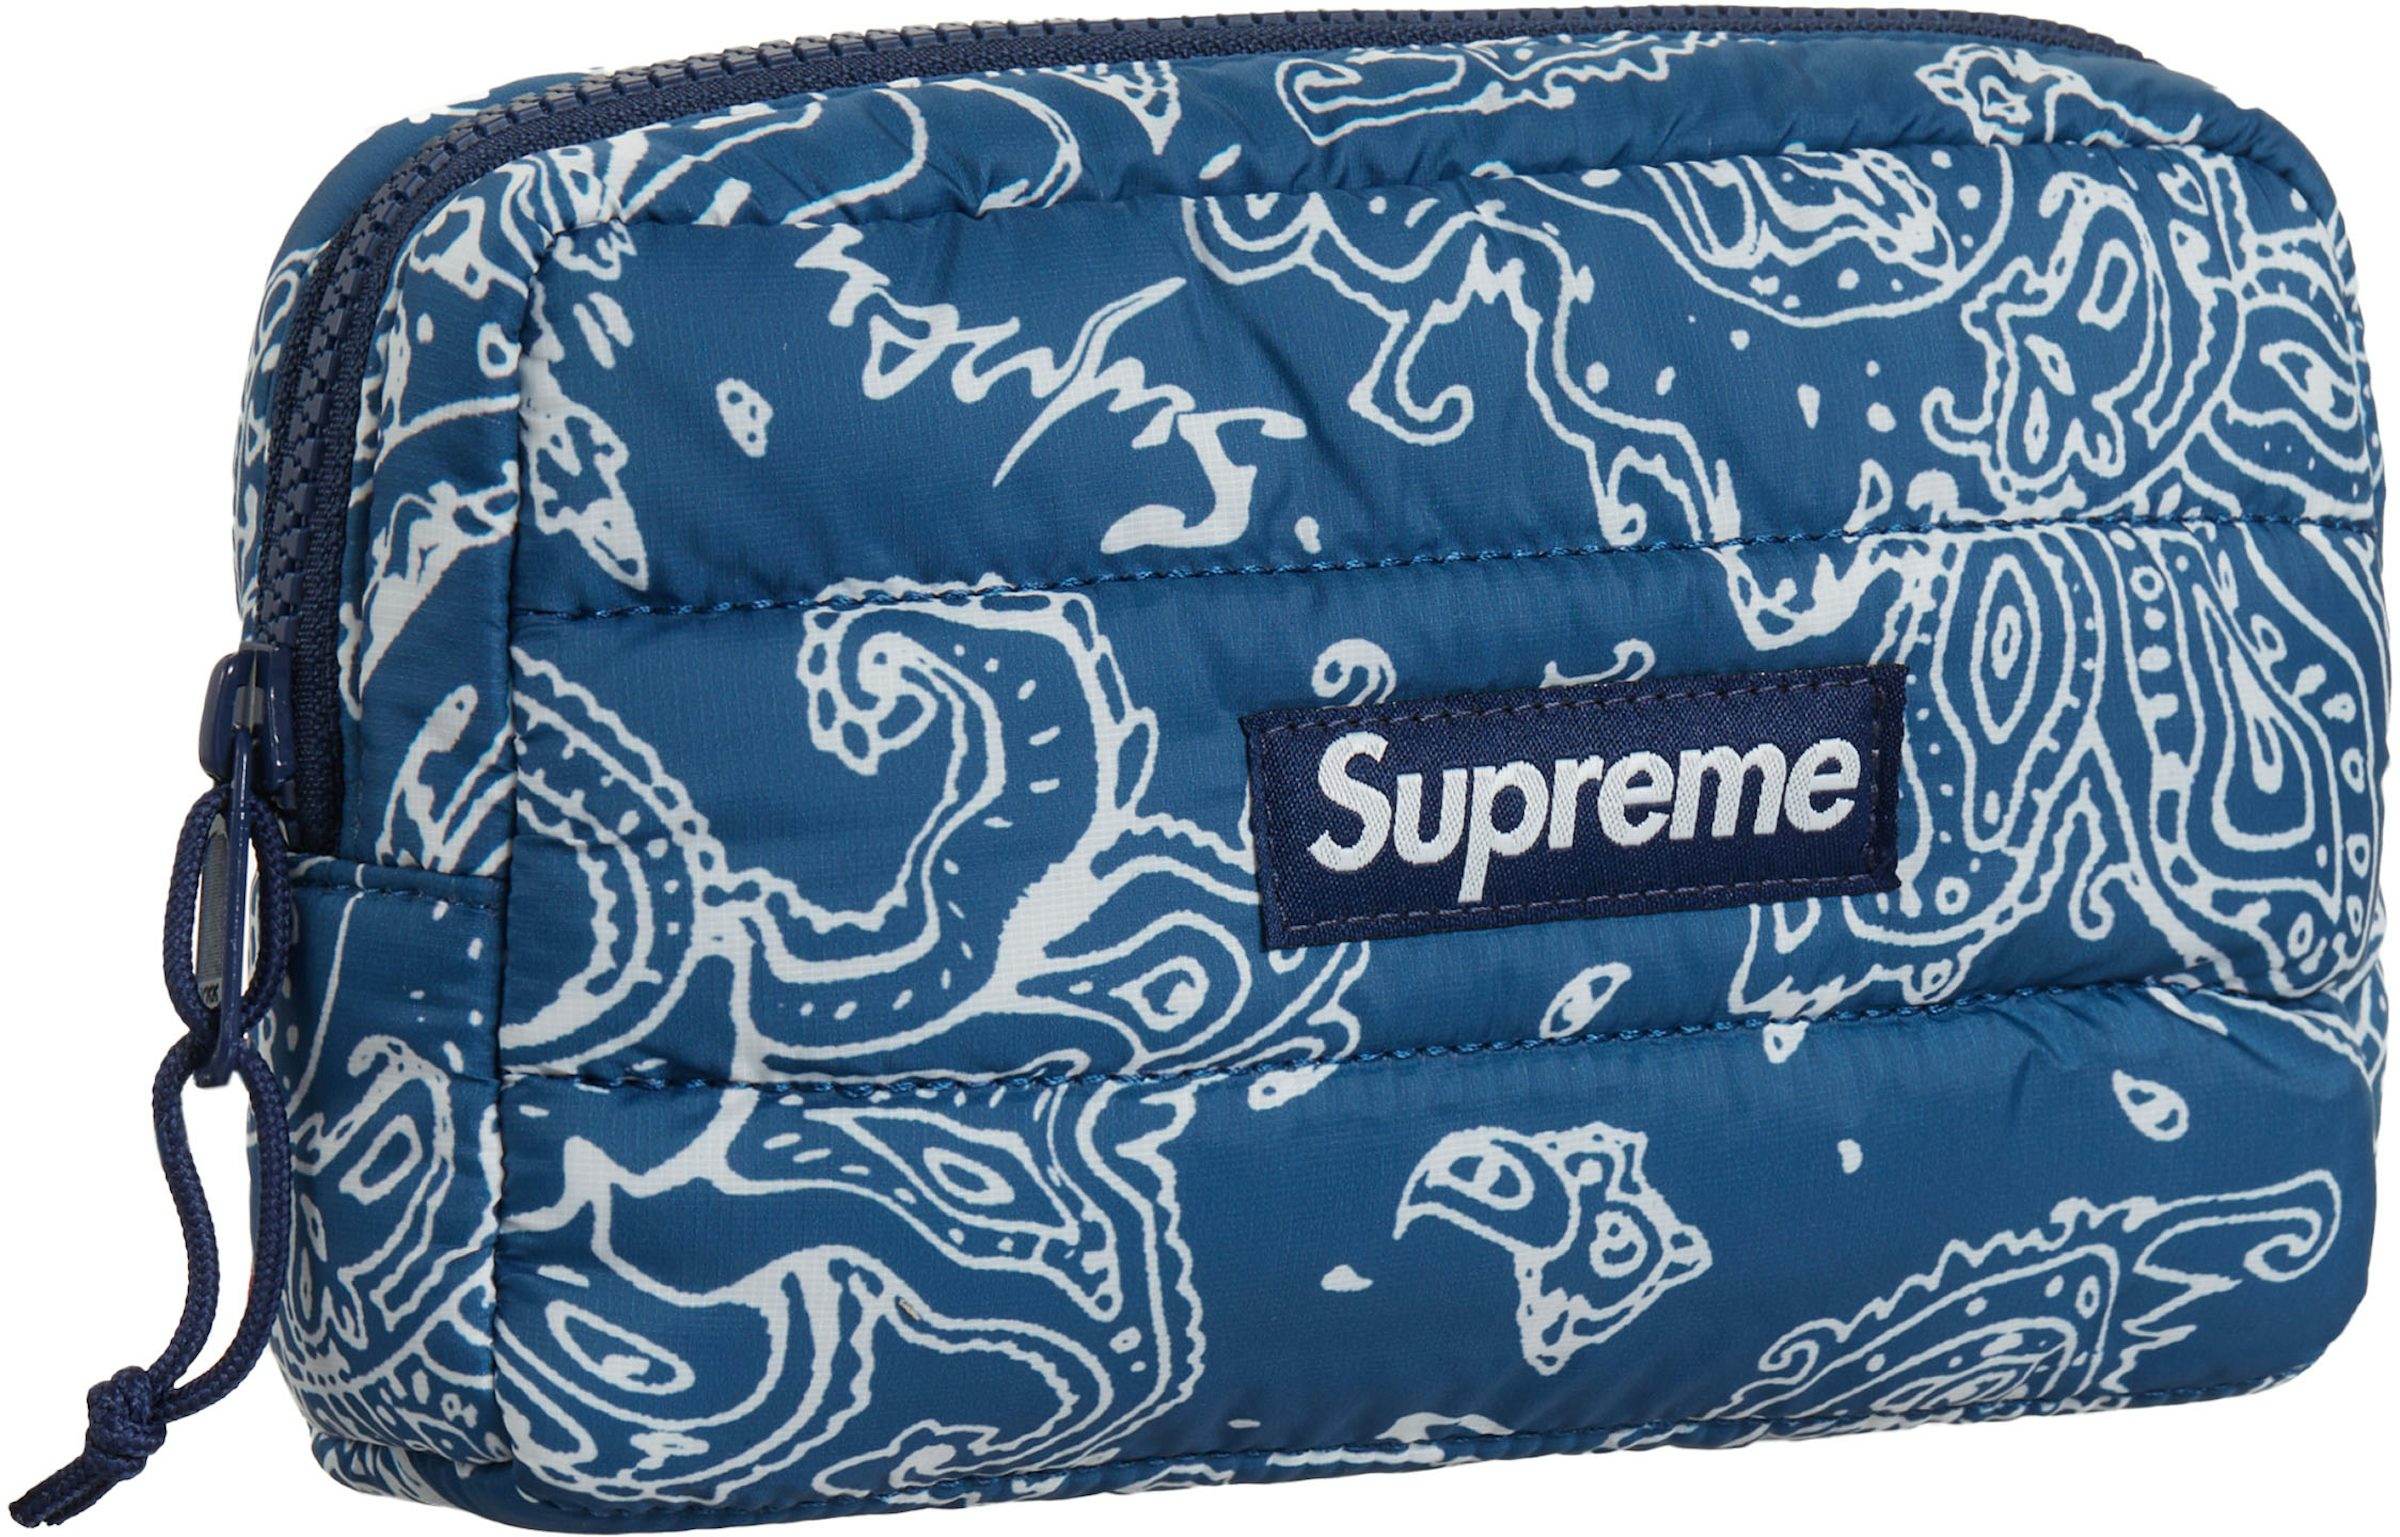 Supreme Puffer Backpack Blue Paisley - FW22 - US